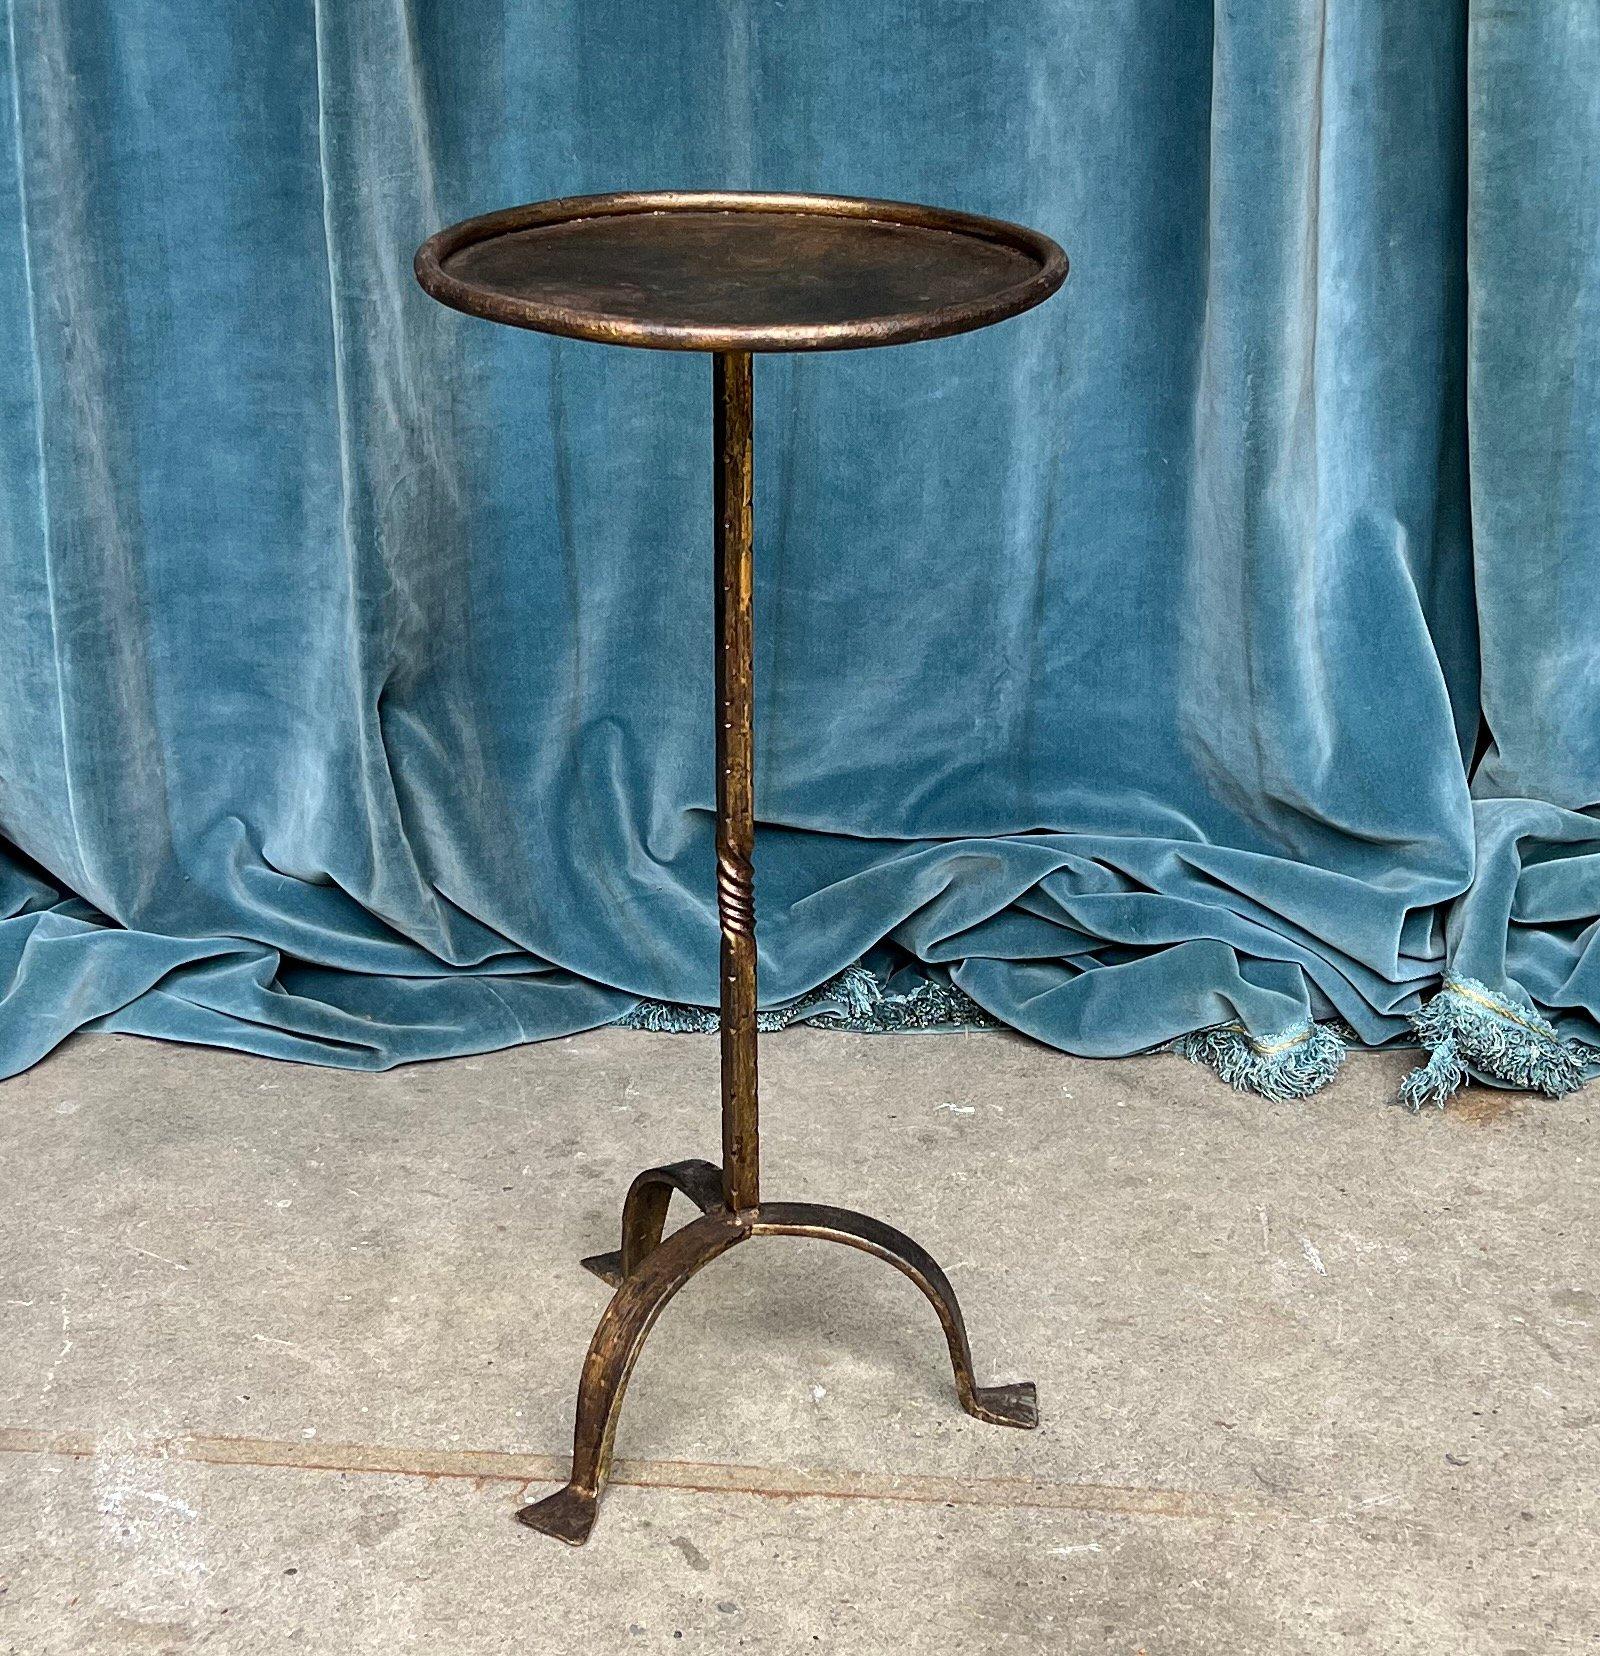 This recently fabricated small Spanish metal and iron side table showcases the finesse of skilled craftsmanship. It was recently created by accomplished artisans using traditional iron-working methods with meticulous attention to detail and an